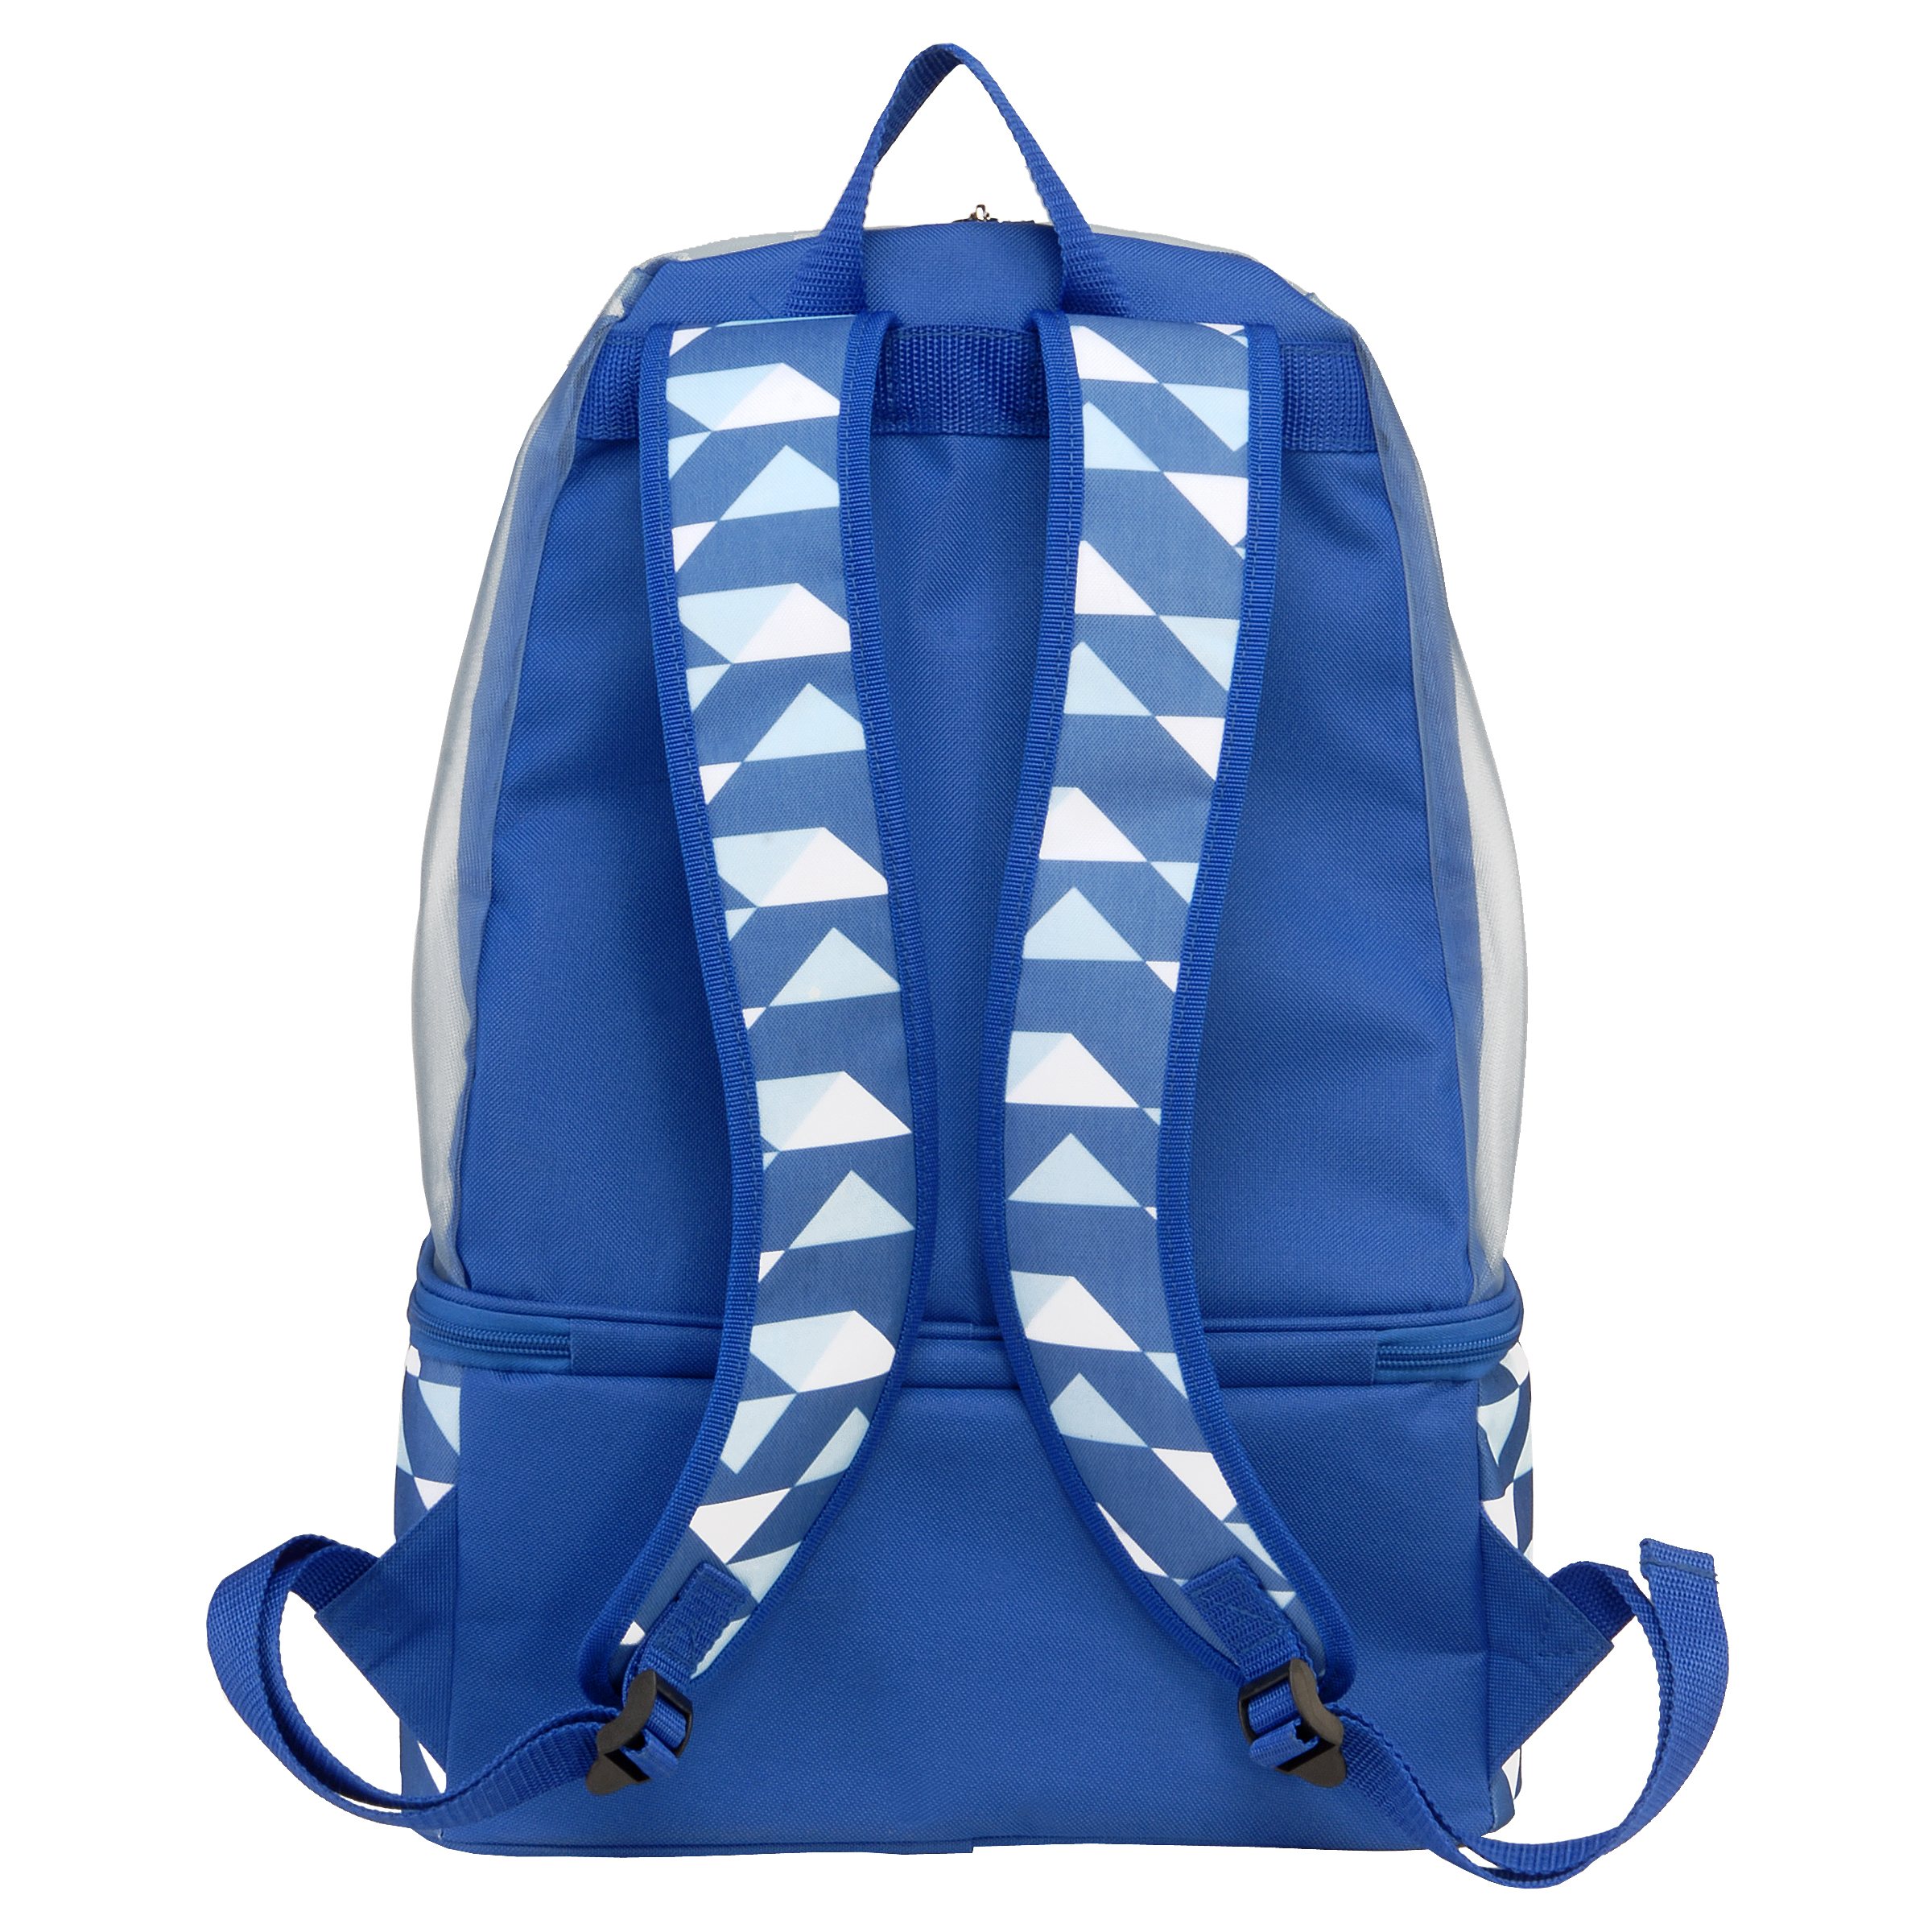 Backpack Style Cooler Beach Bag - image 2 of 5